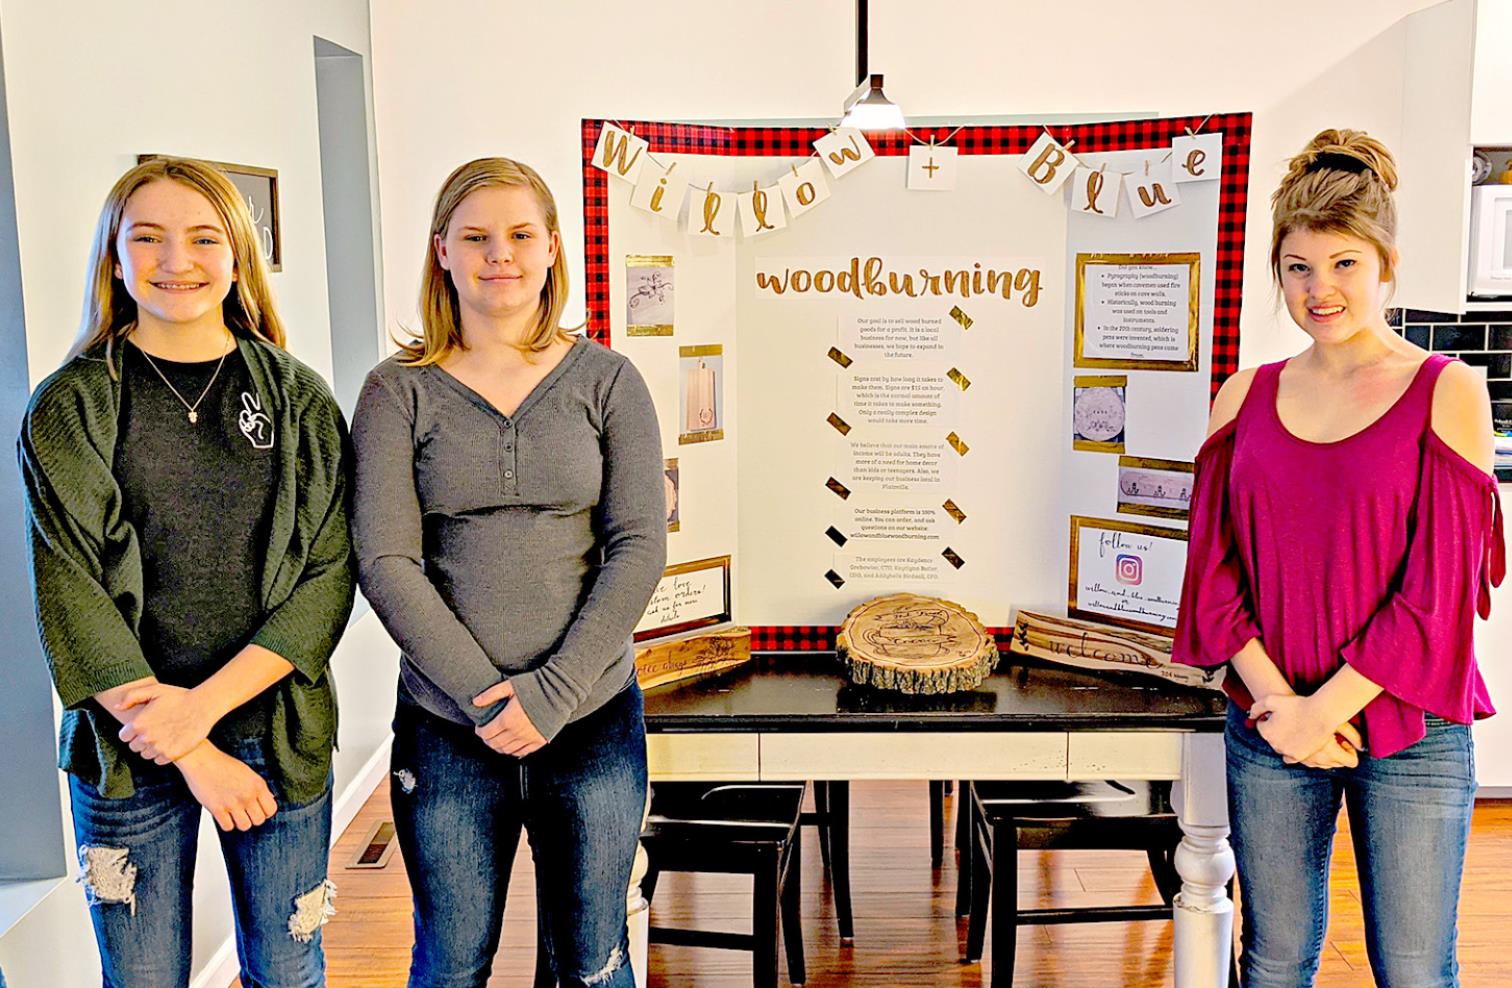 KAYDENCE GREBOWIEC, Addybelle Birdsall and Kaytlynn Butler of Plainville Junior High, are pictured with their display, Willow &amp; Blue Woodburning during the Rooks County Youth Entrepreneurship Challenge held recently.